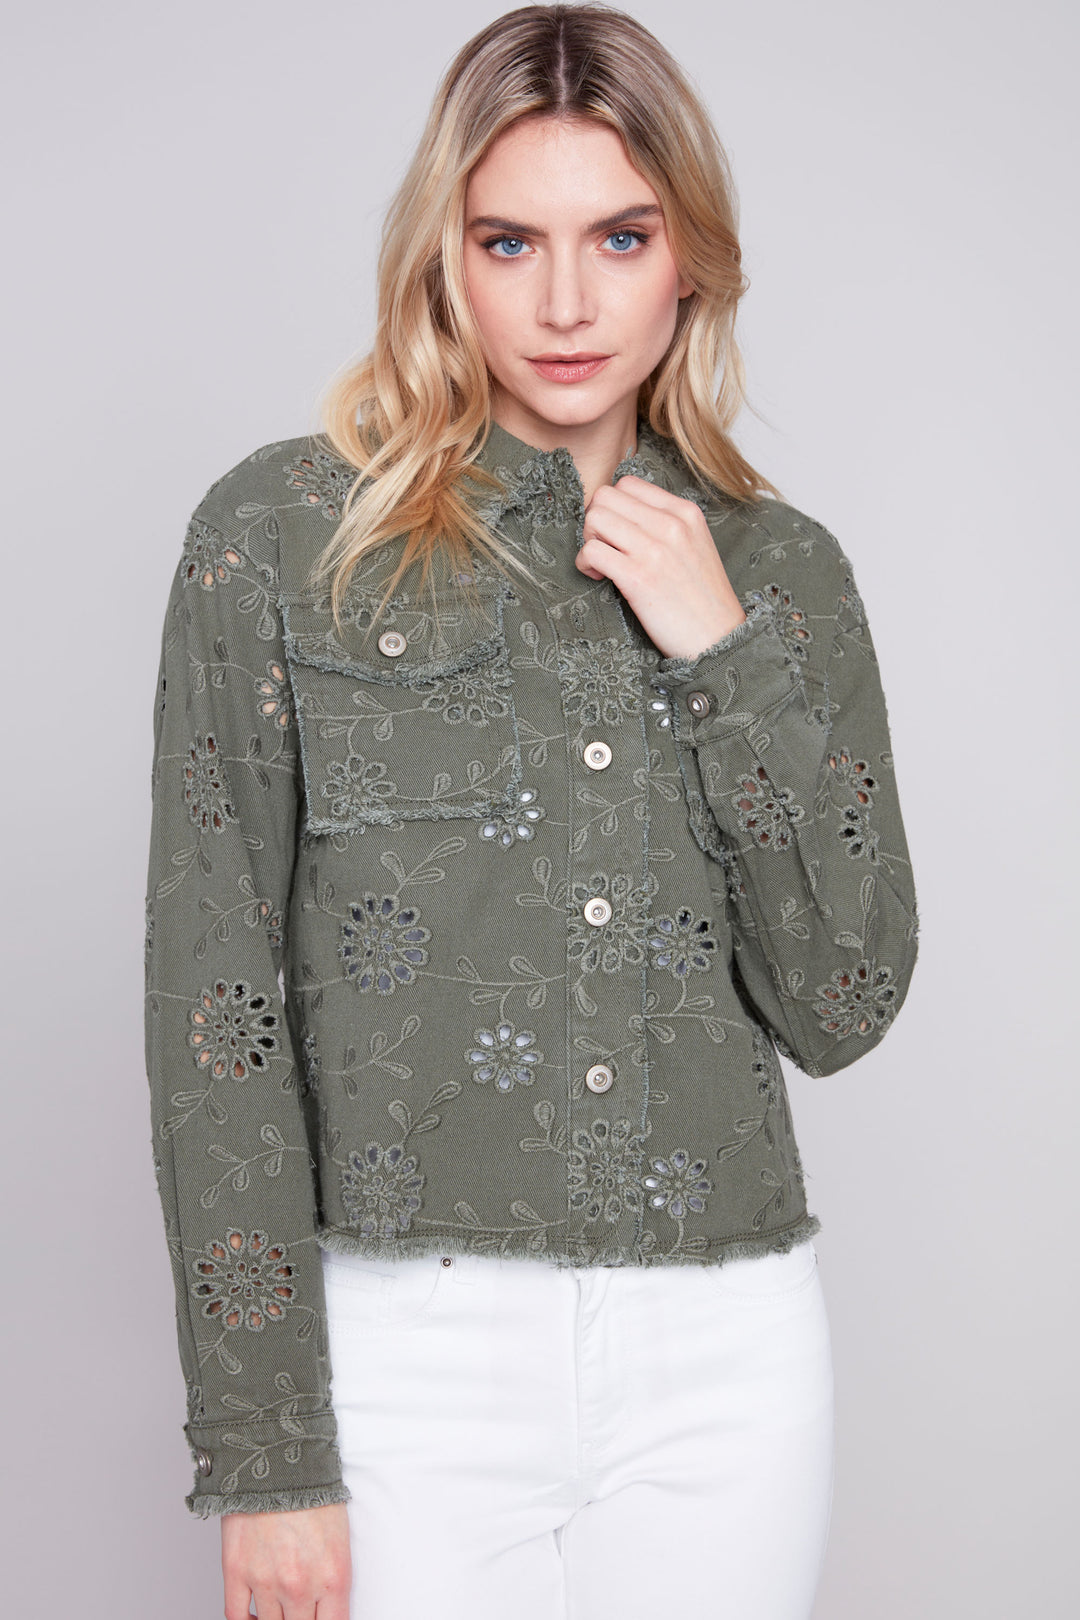 Featuring a stunning embroidered eyelet design, this jean jacket exudes sophistication and fun! 